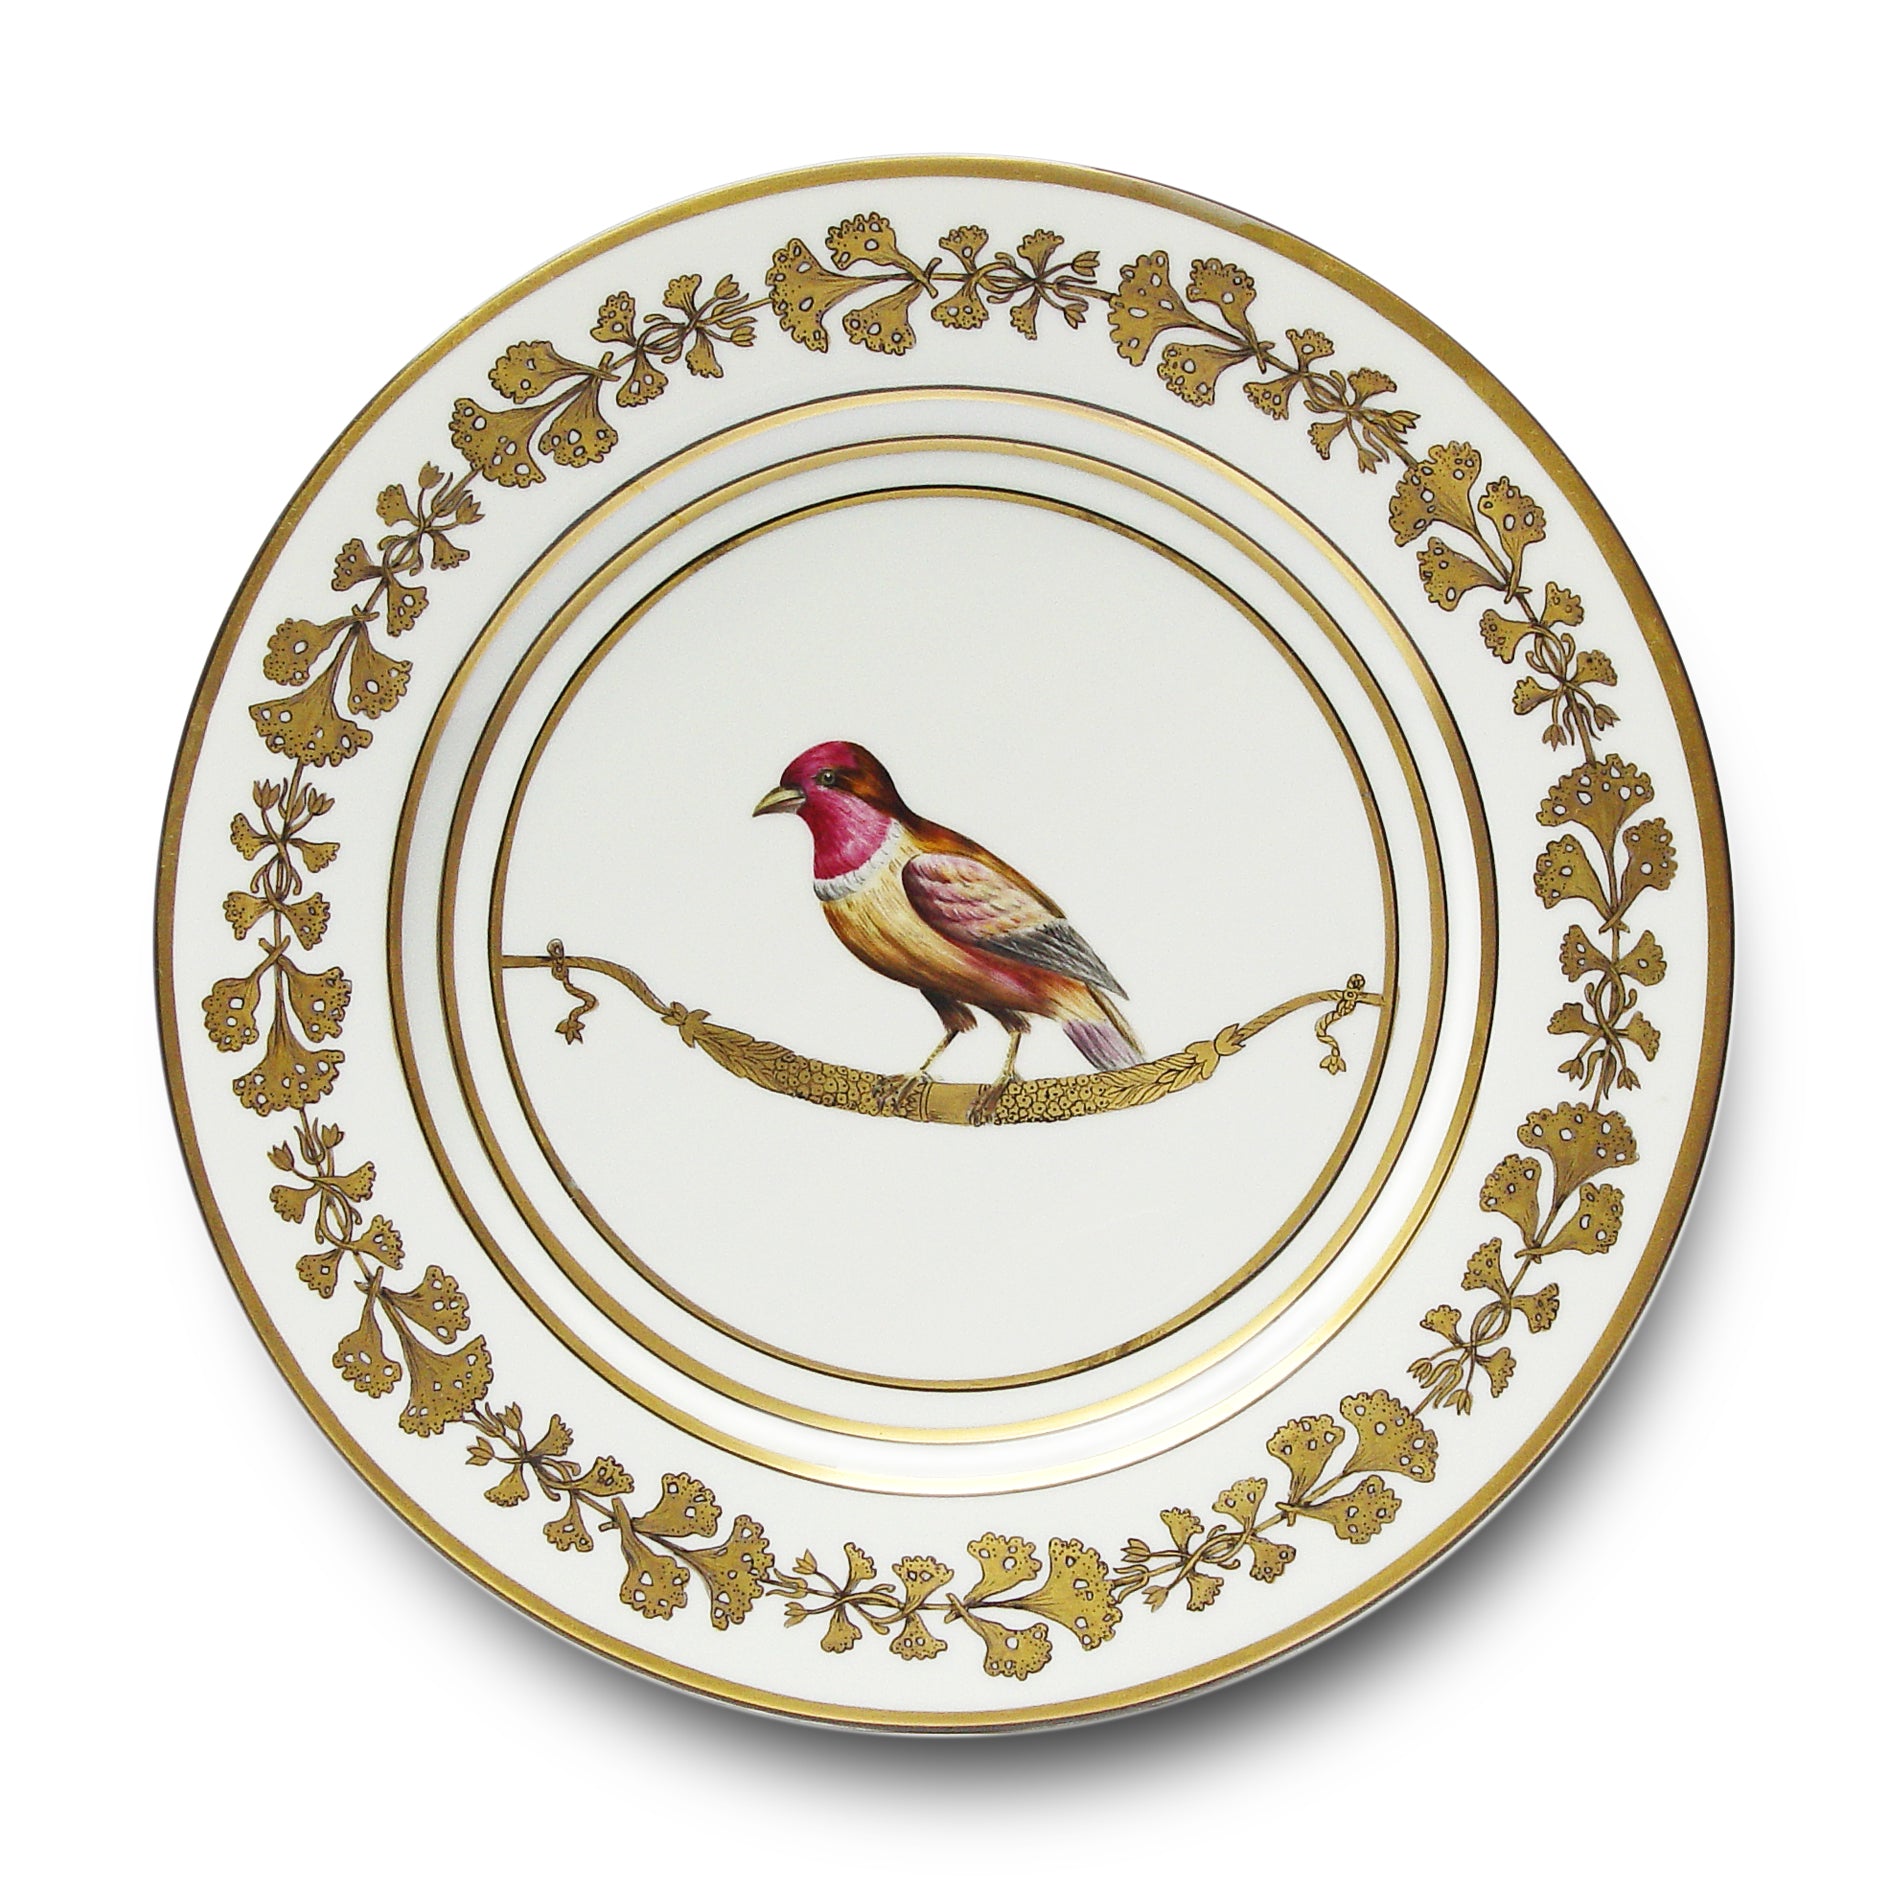 Or des Airs - Buffet plate 02